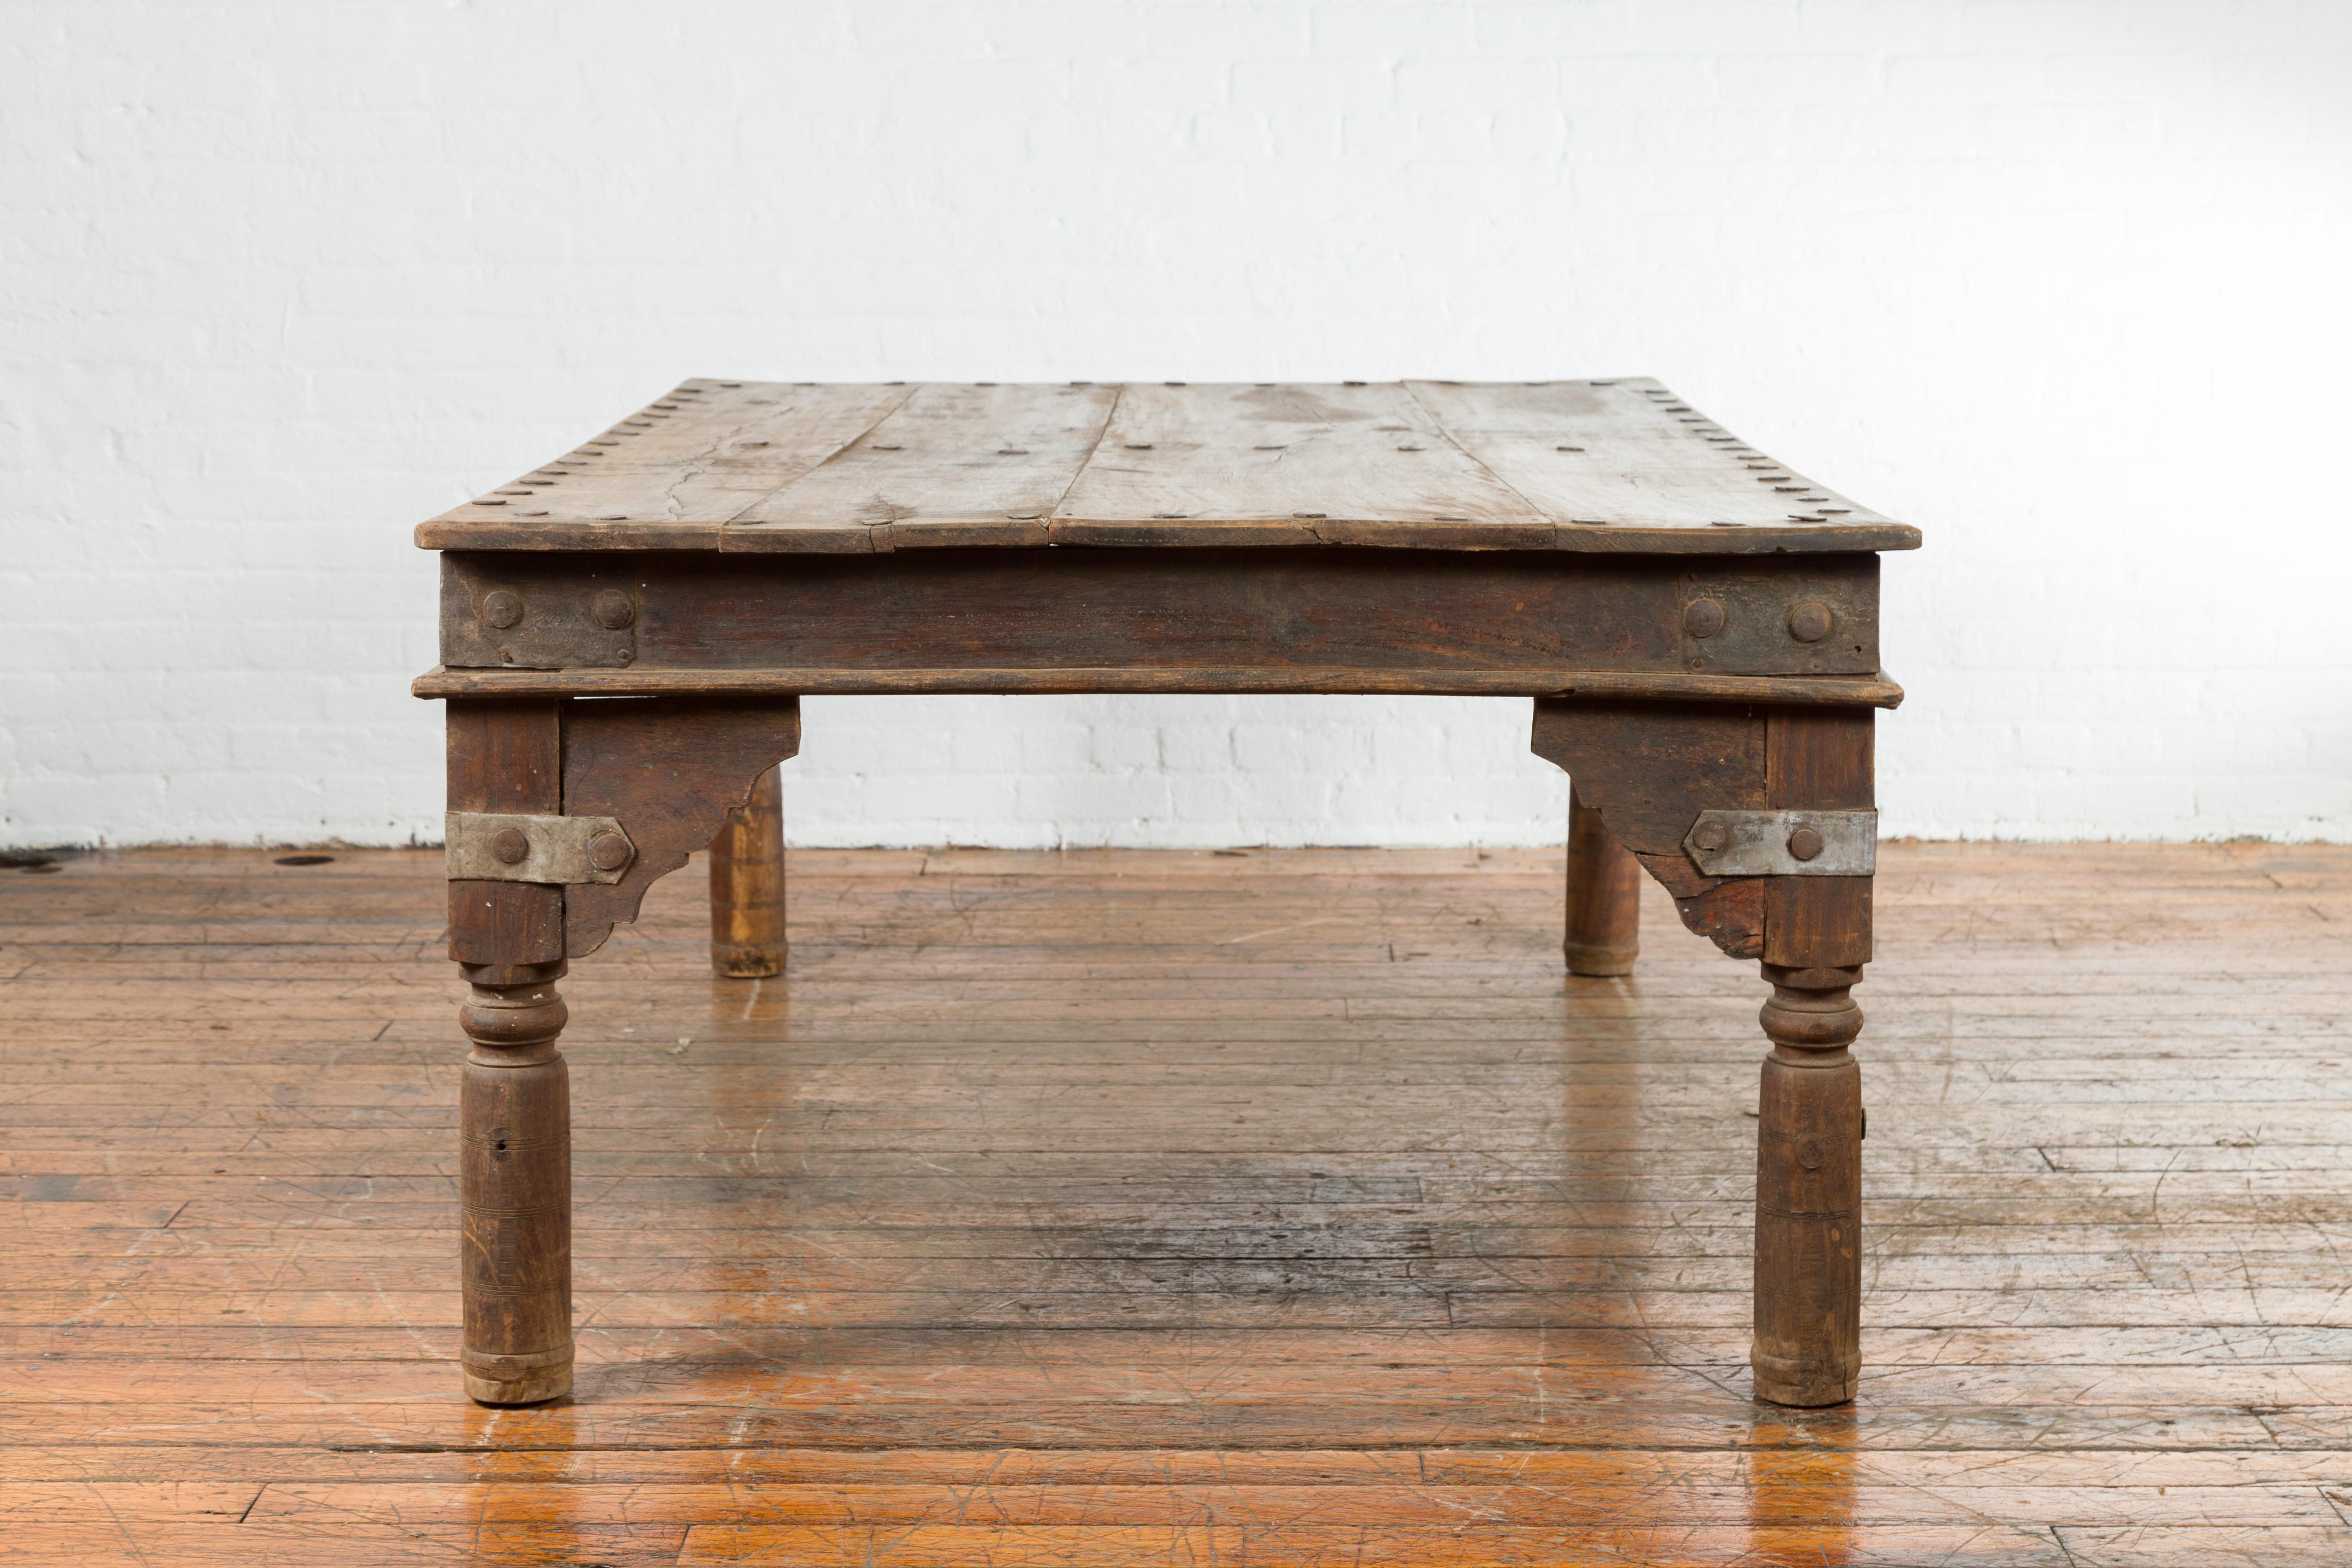 Metal Indian Wood Dining Table with Distressed Patina, Iron Details and Baluster Legs For Sale